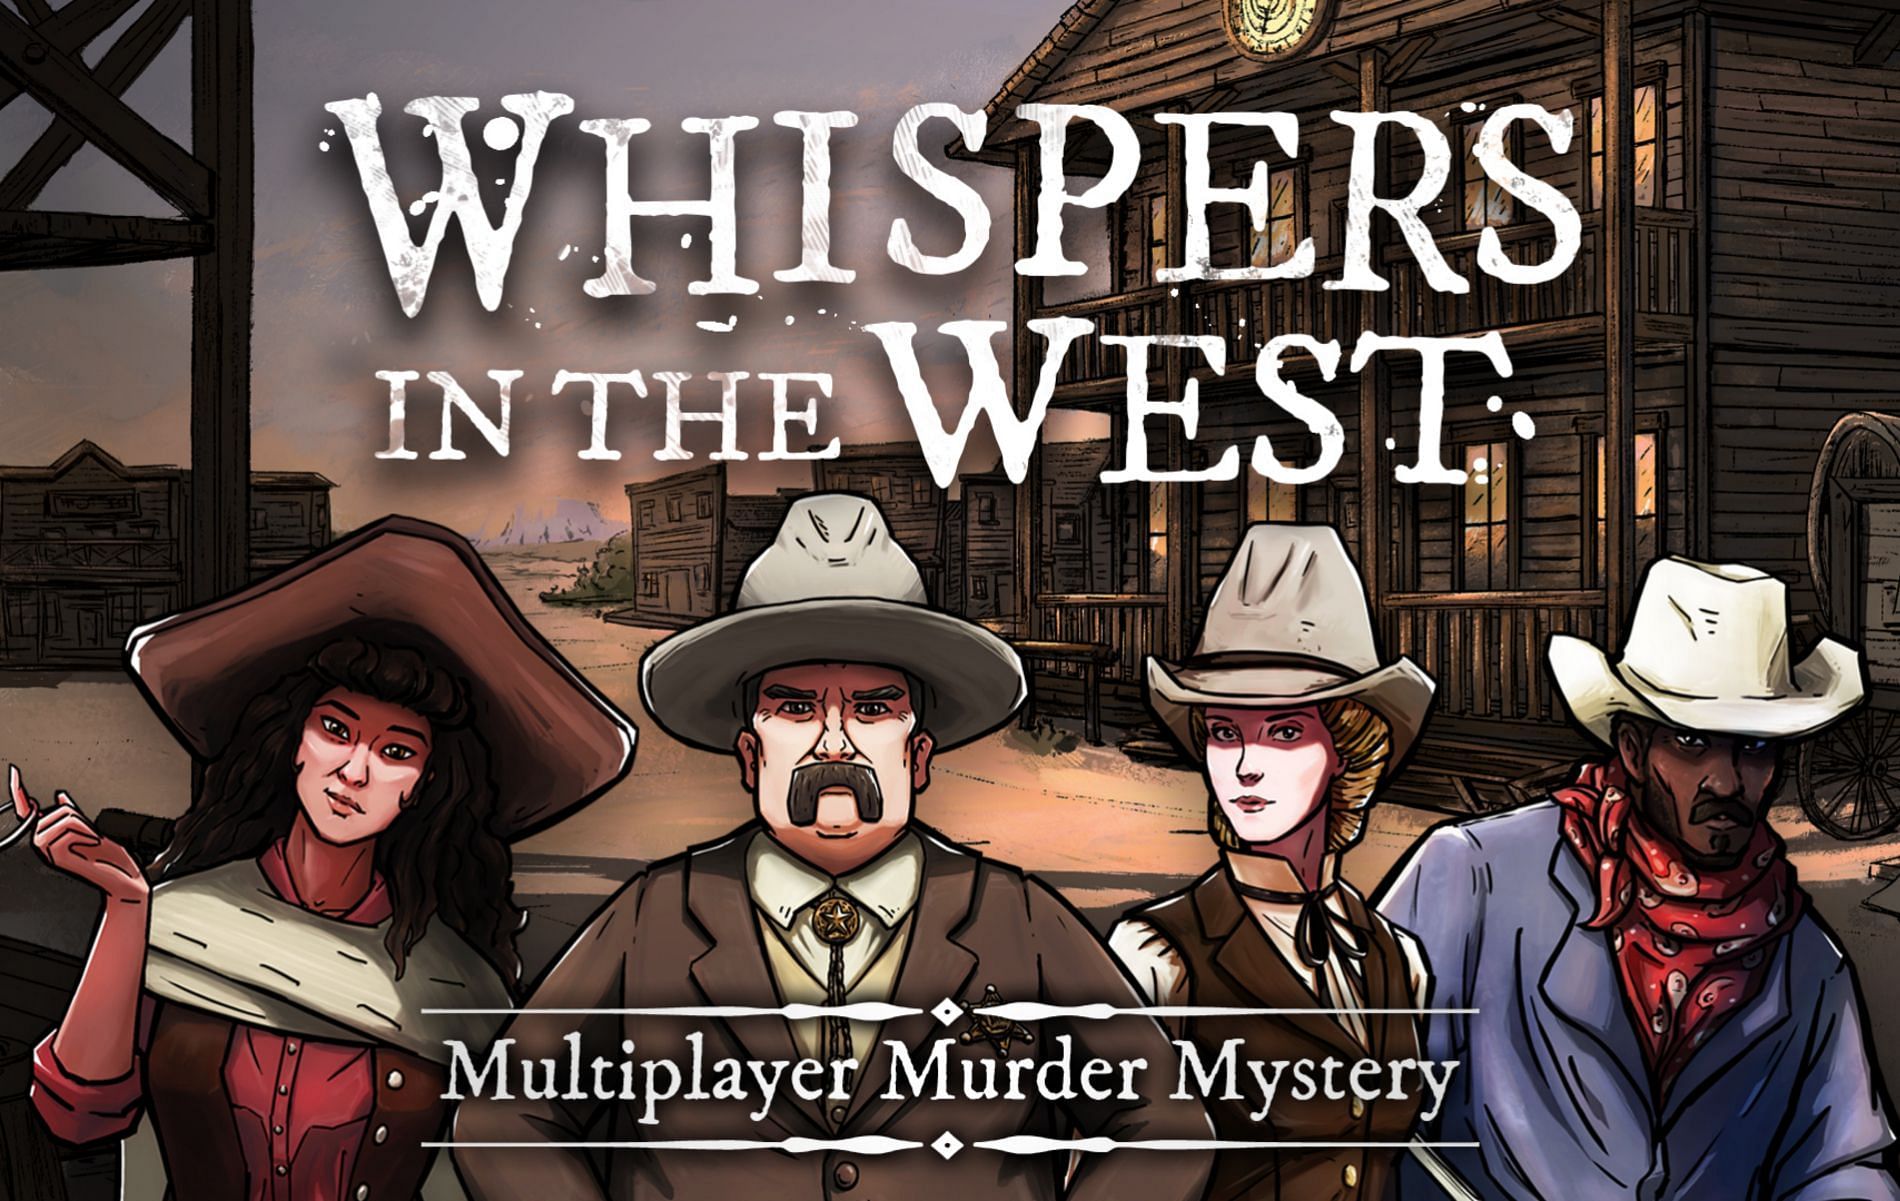 The online co-op murder mystery game (Image via Whispers in the West)